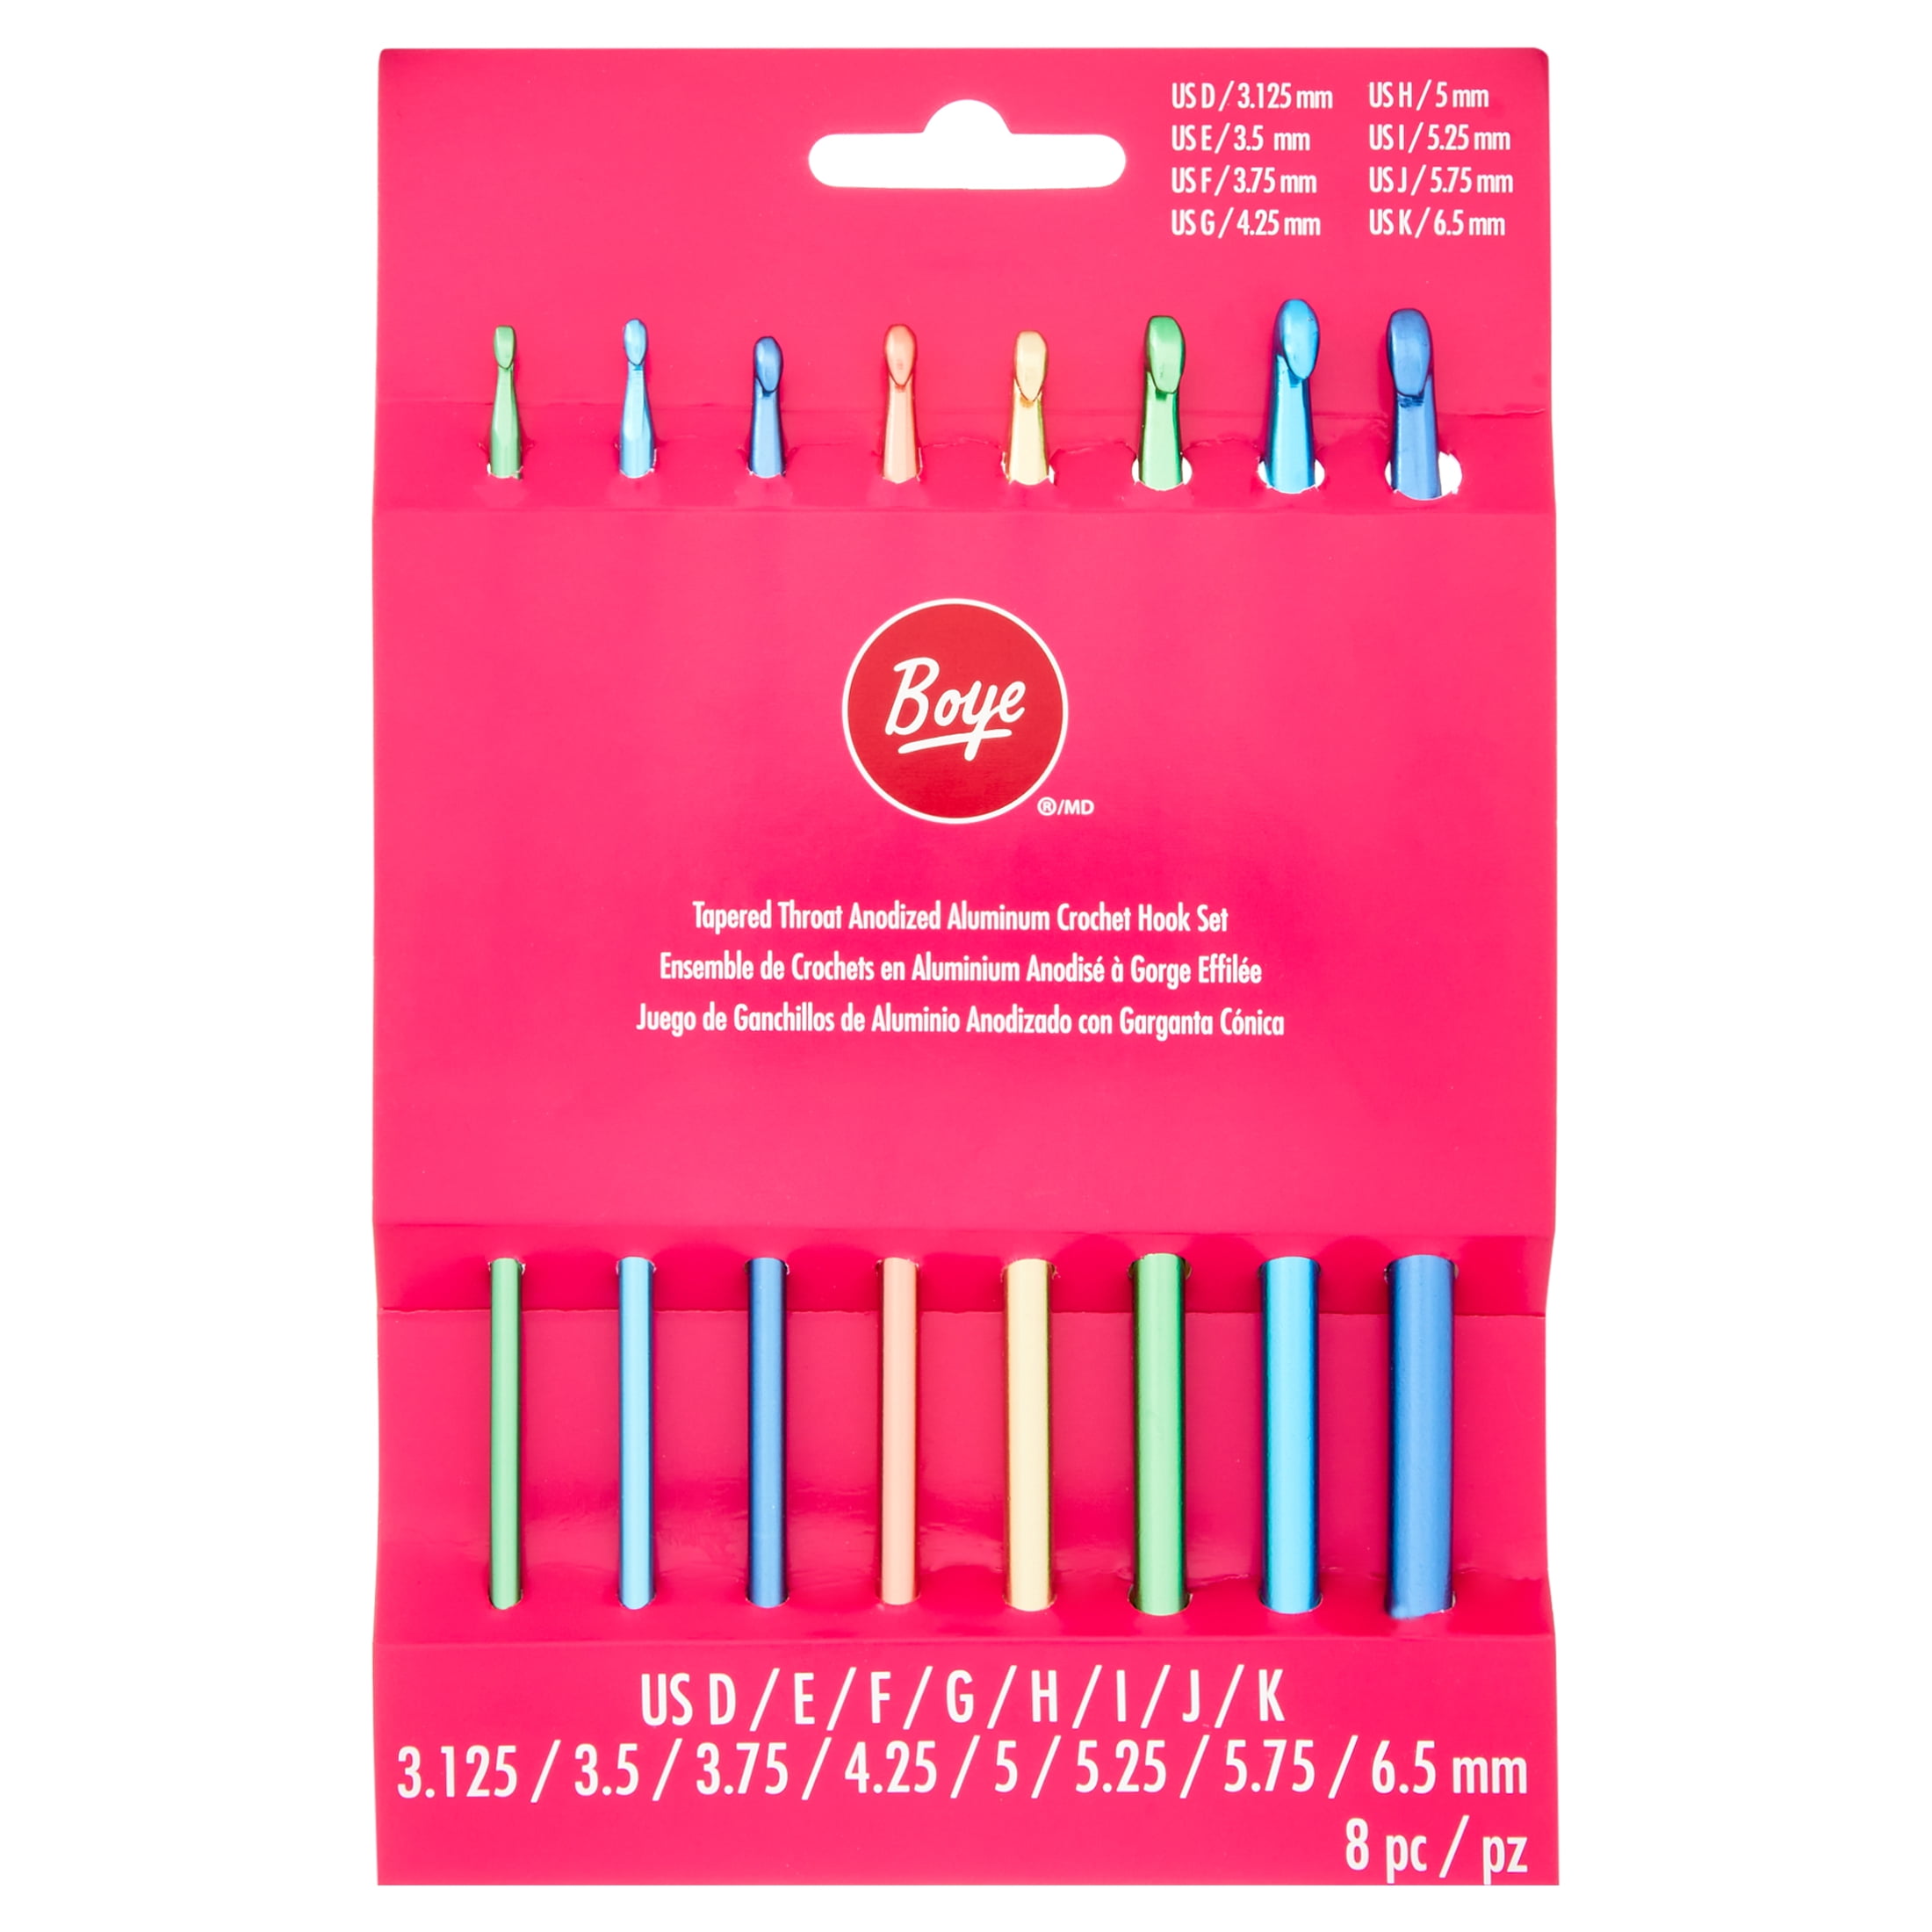 The Quilted Bear 12 Piece Crochet Hook Set – The Quilted Bear